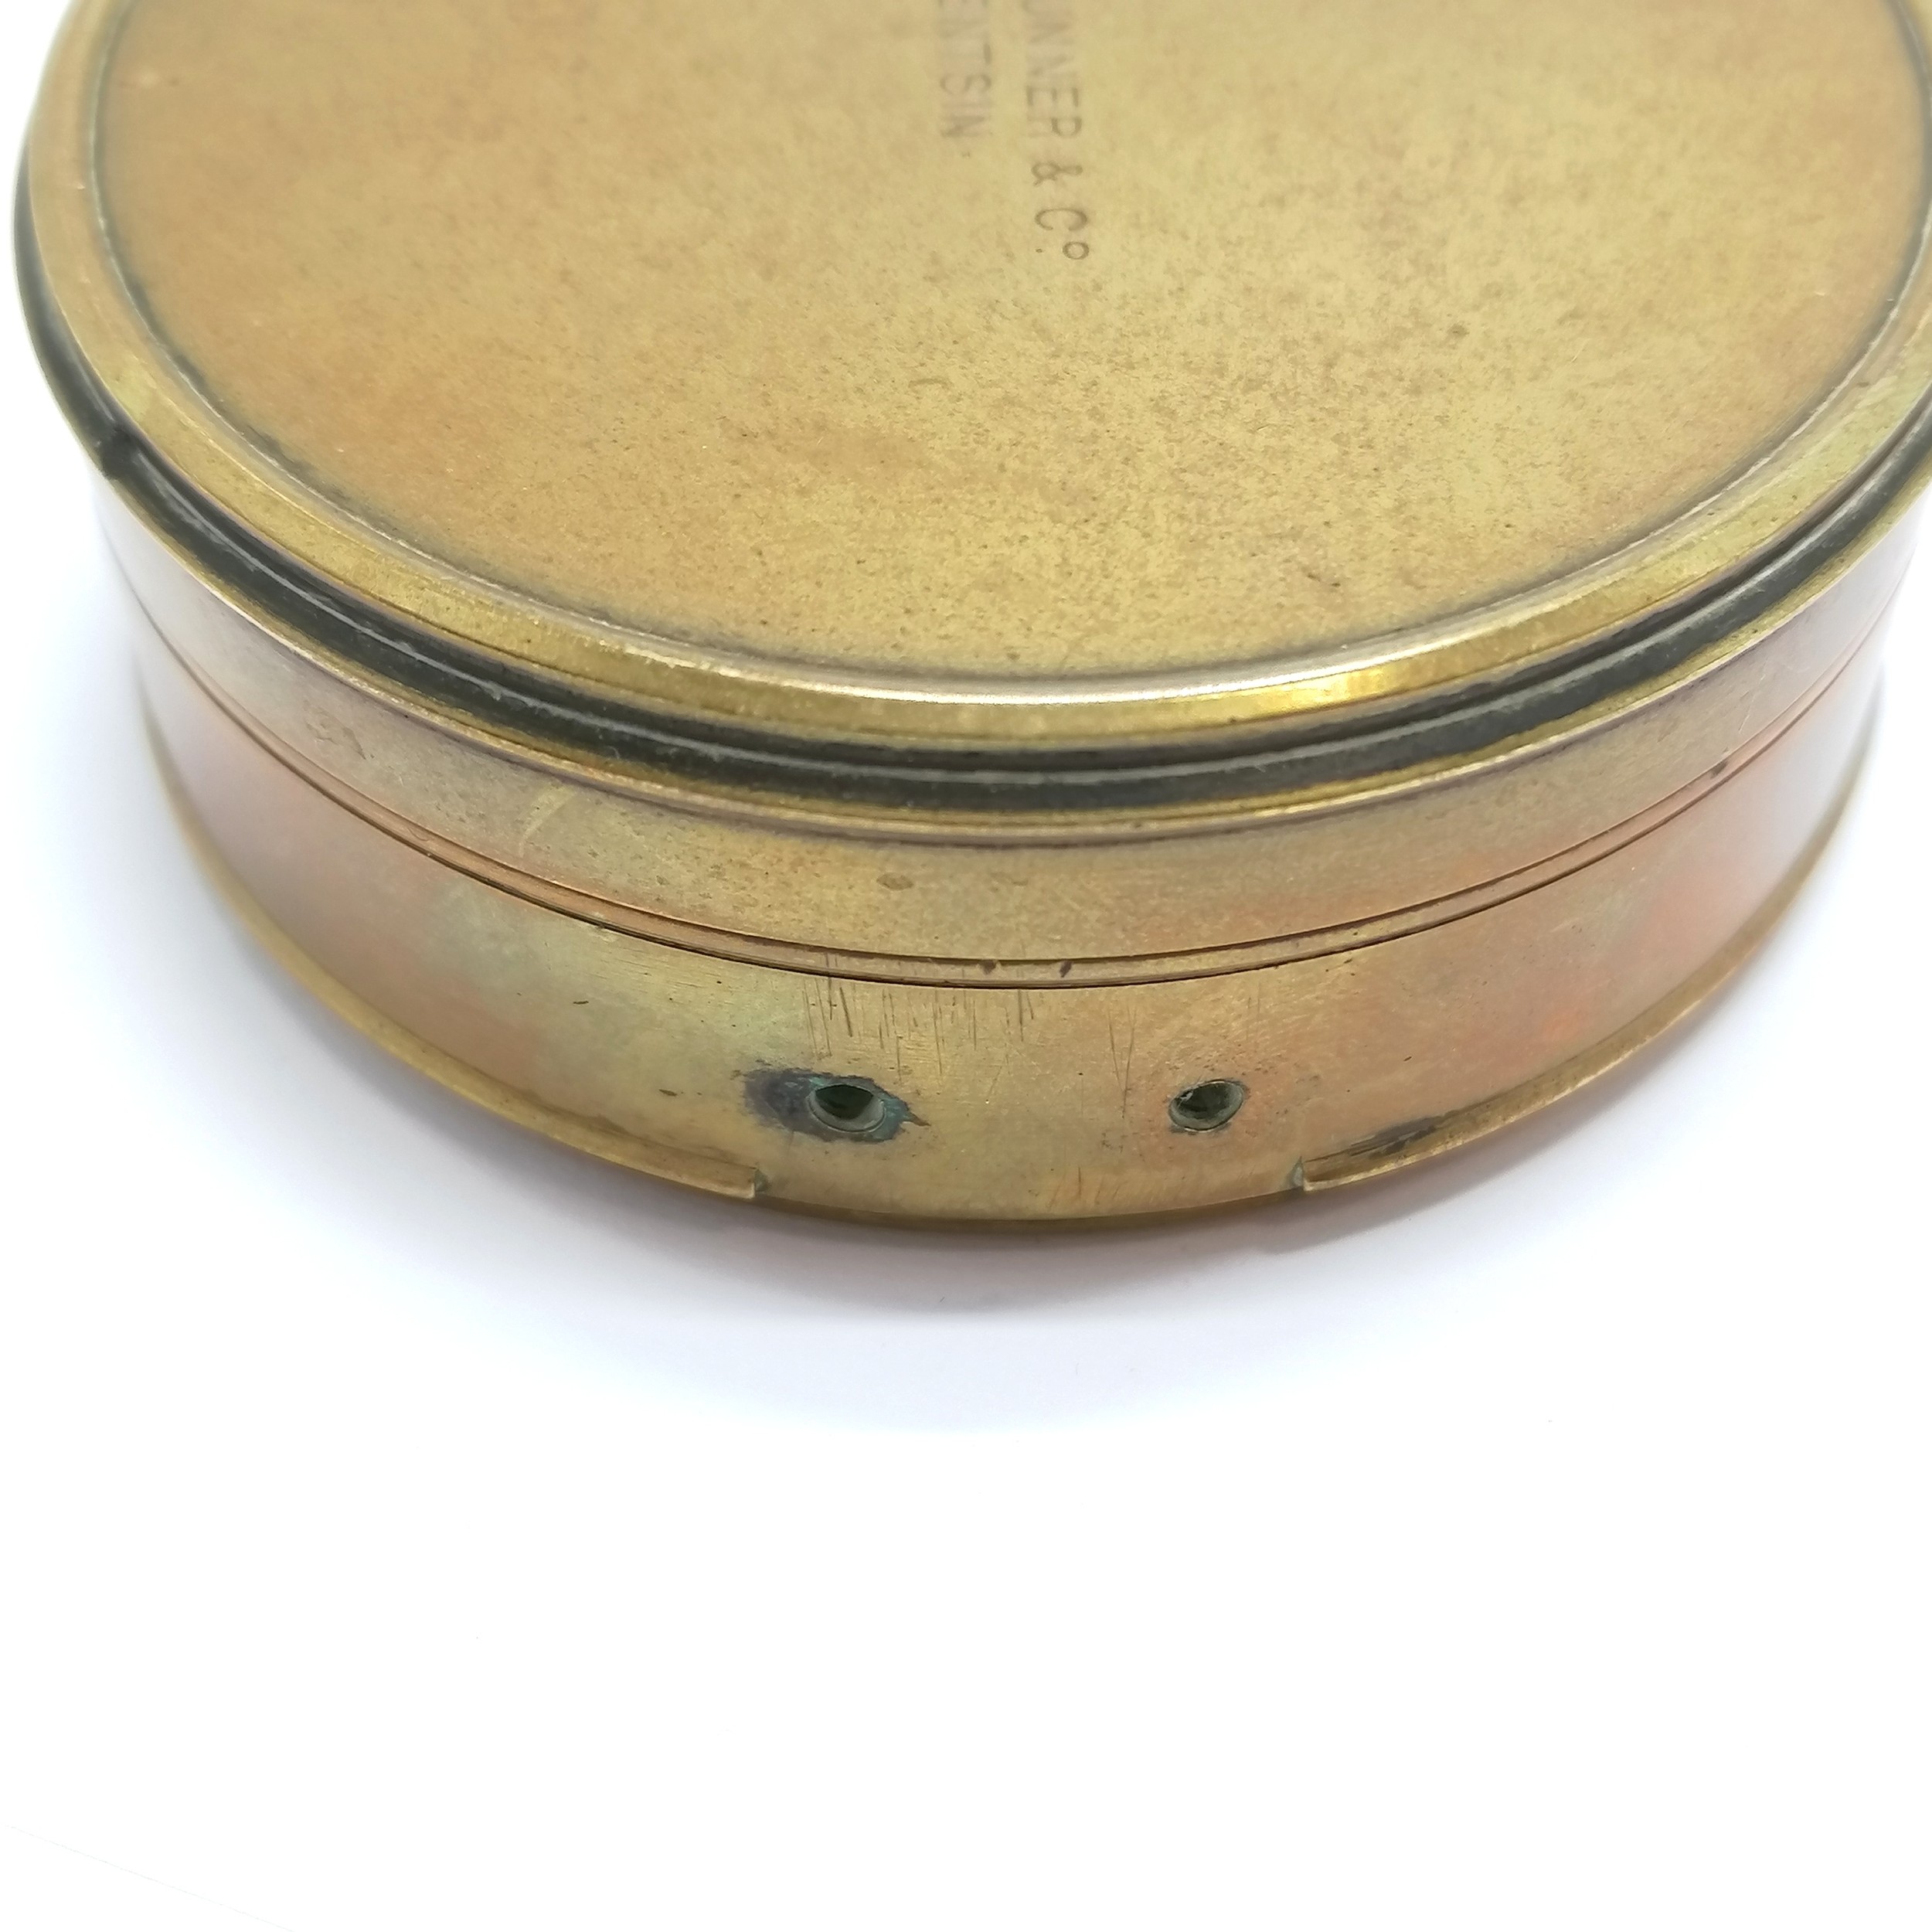 Antique prismatic compass (7.4cm diameter & missing lens) retailed by Hirsbrunner & Co (Tientsin) in - Image 4 of 5